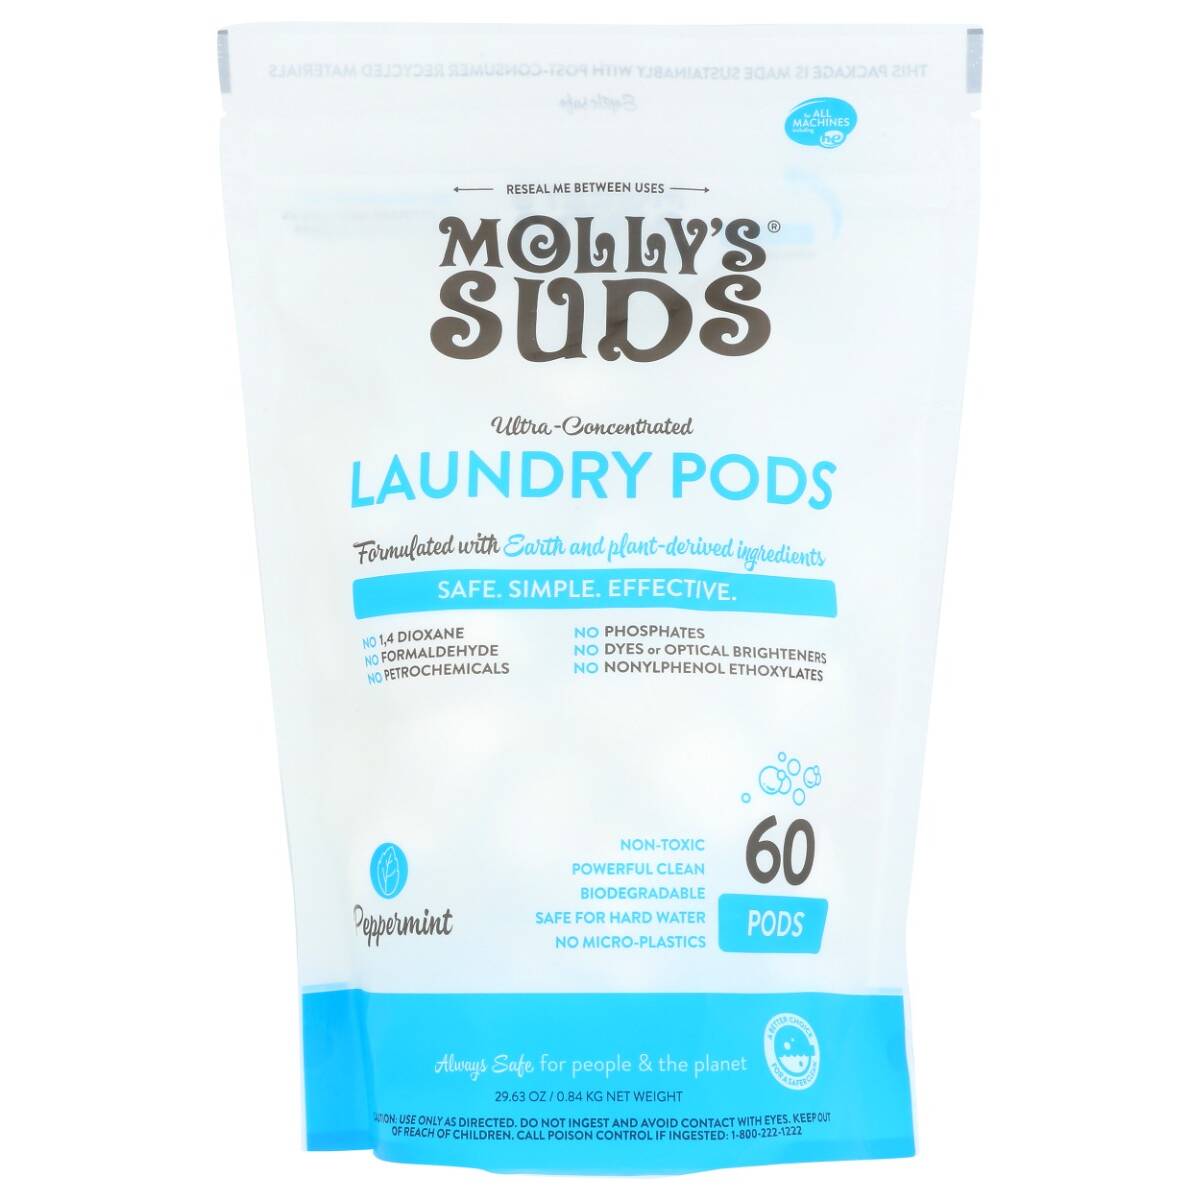 Molly's Suds, Molly Suds Laundry Detergent, Molly Suds Detergent